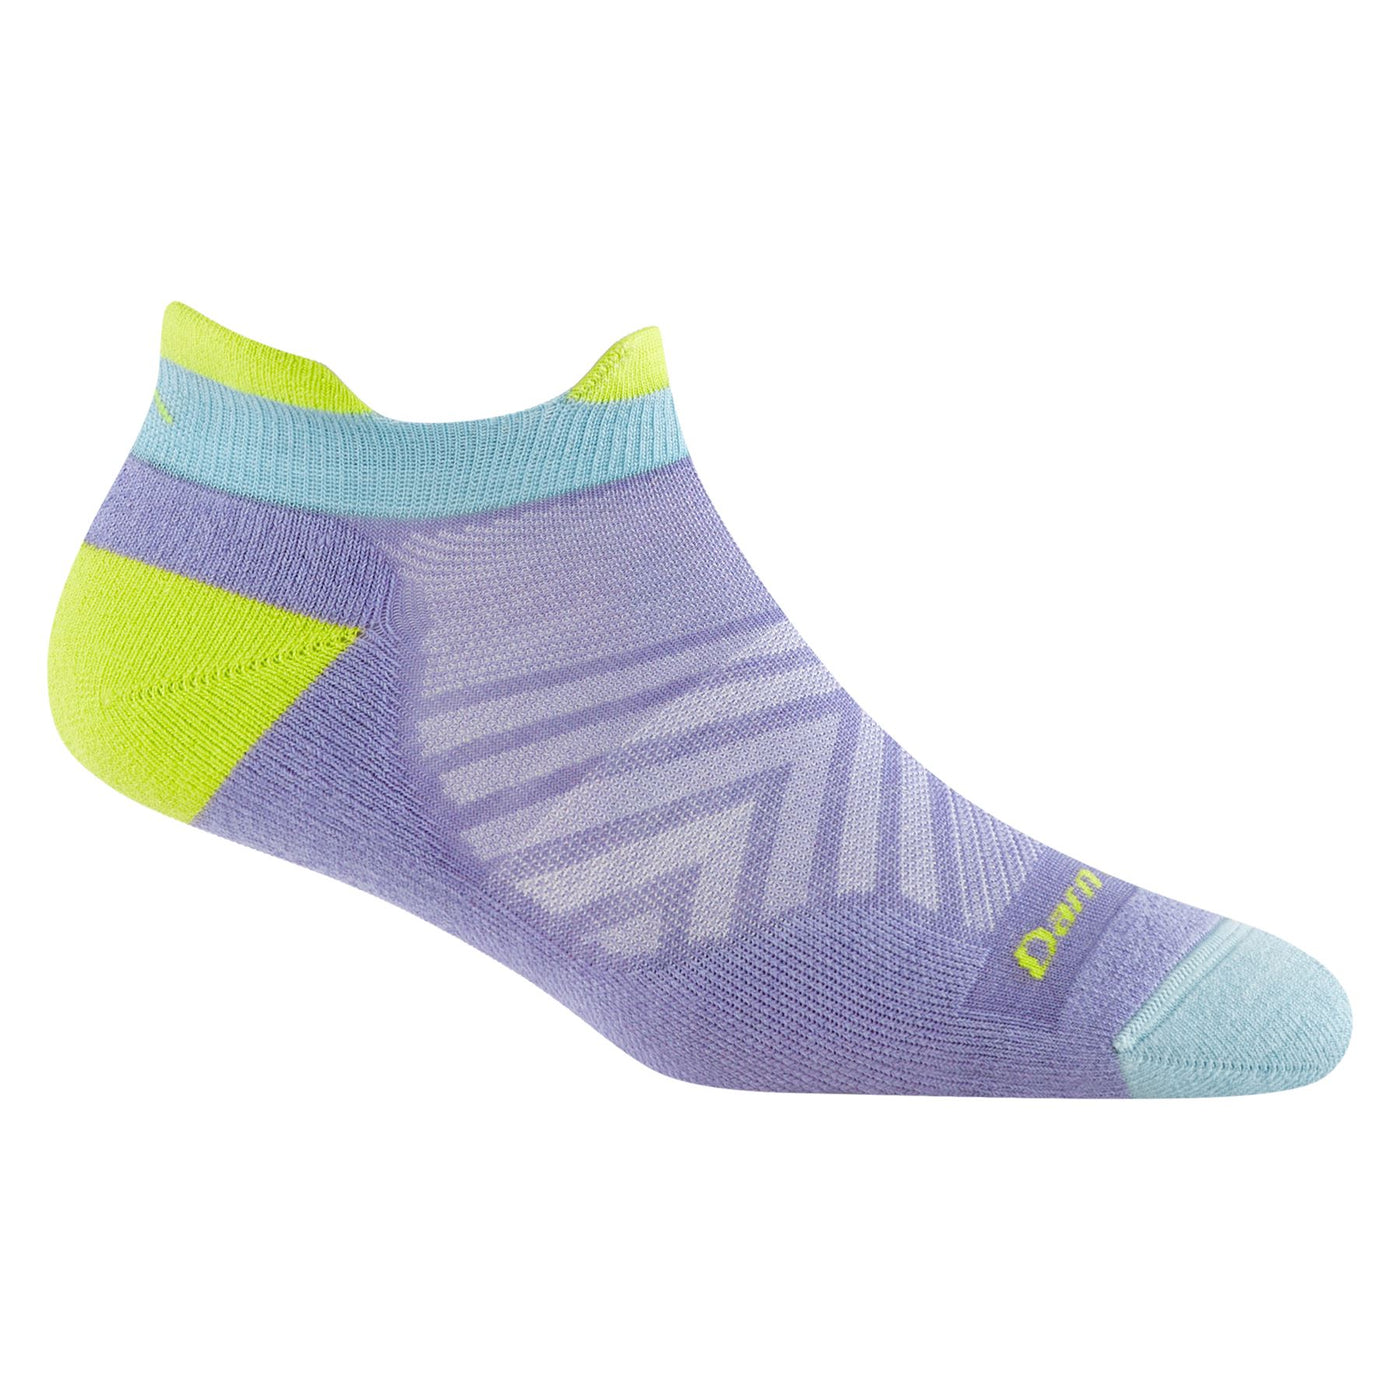 Run No Show Tab Ultra-Lightweight With Cushion | Women's - Knock Your Socks Off